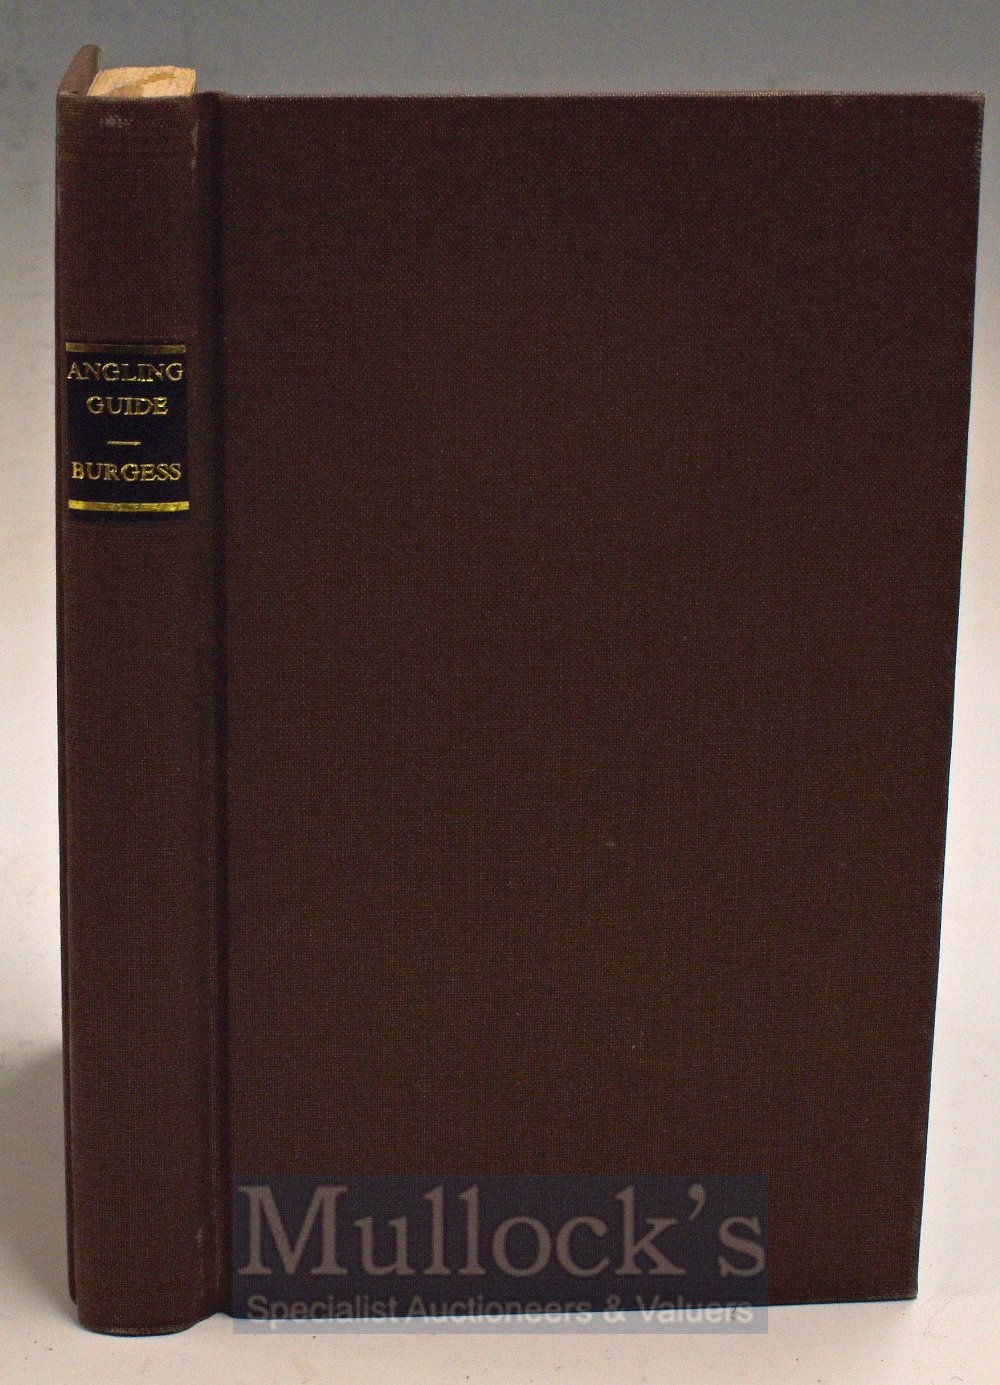 Burgess J T – Angling A Practical Guide, London circa 1867, 1st edition, engraved frontis plate